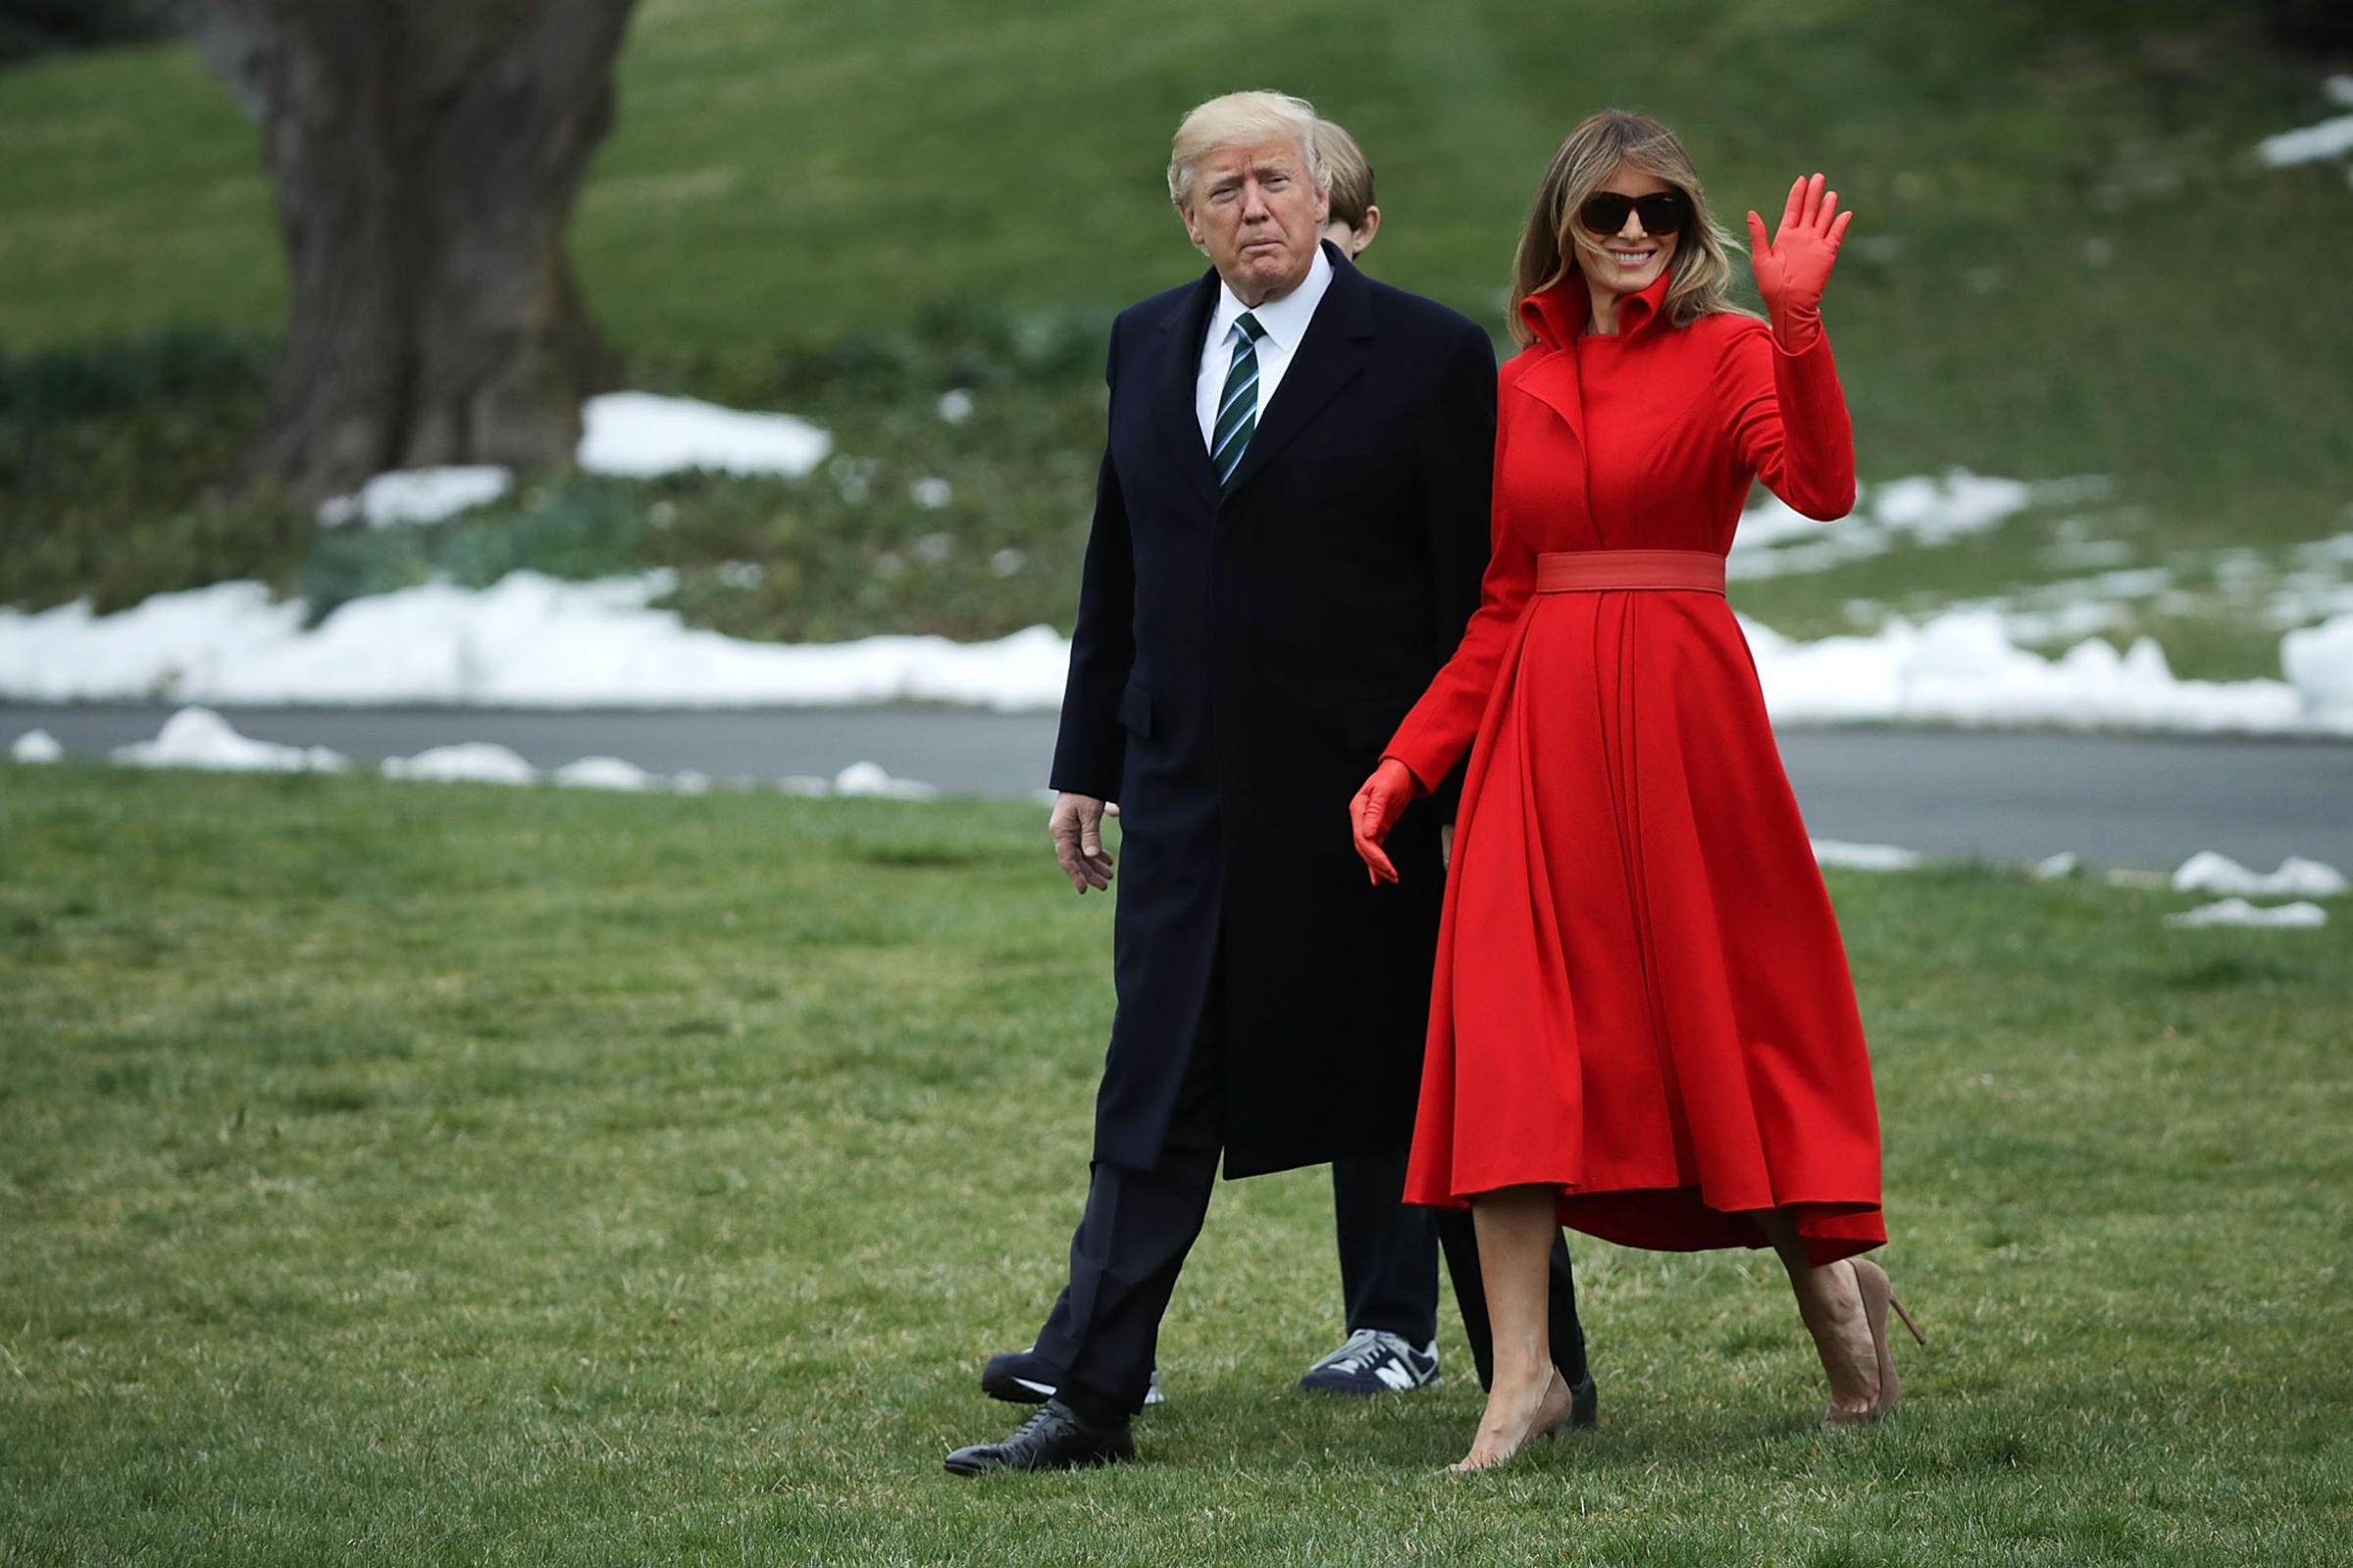 President Donald Trump, first lady Melania Trump wearing a custom made coatdress by designer Alice Roi, and their son Barron Trump depart the White